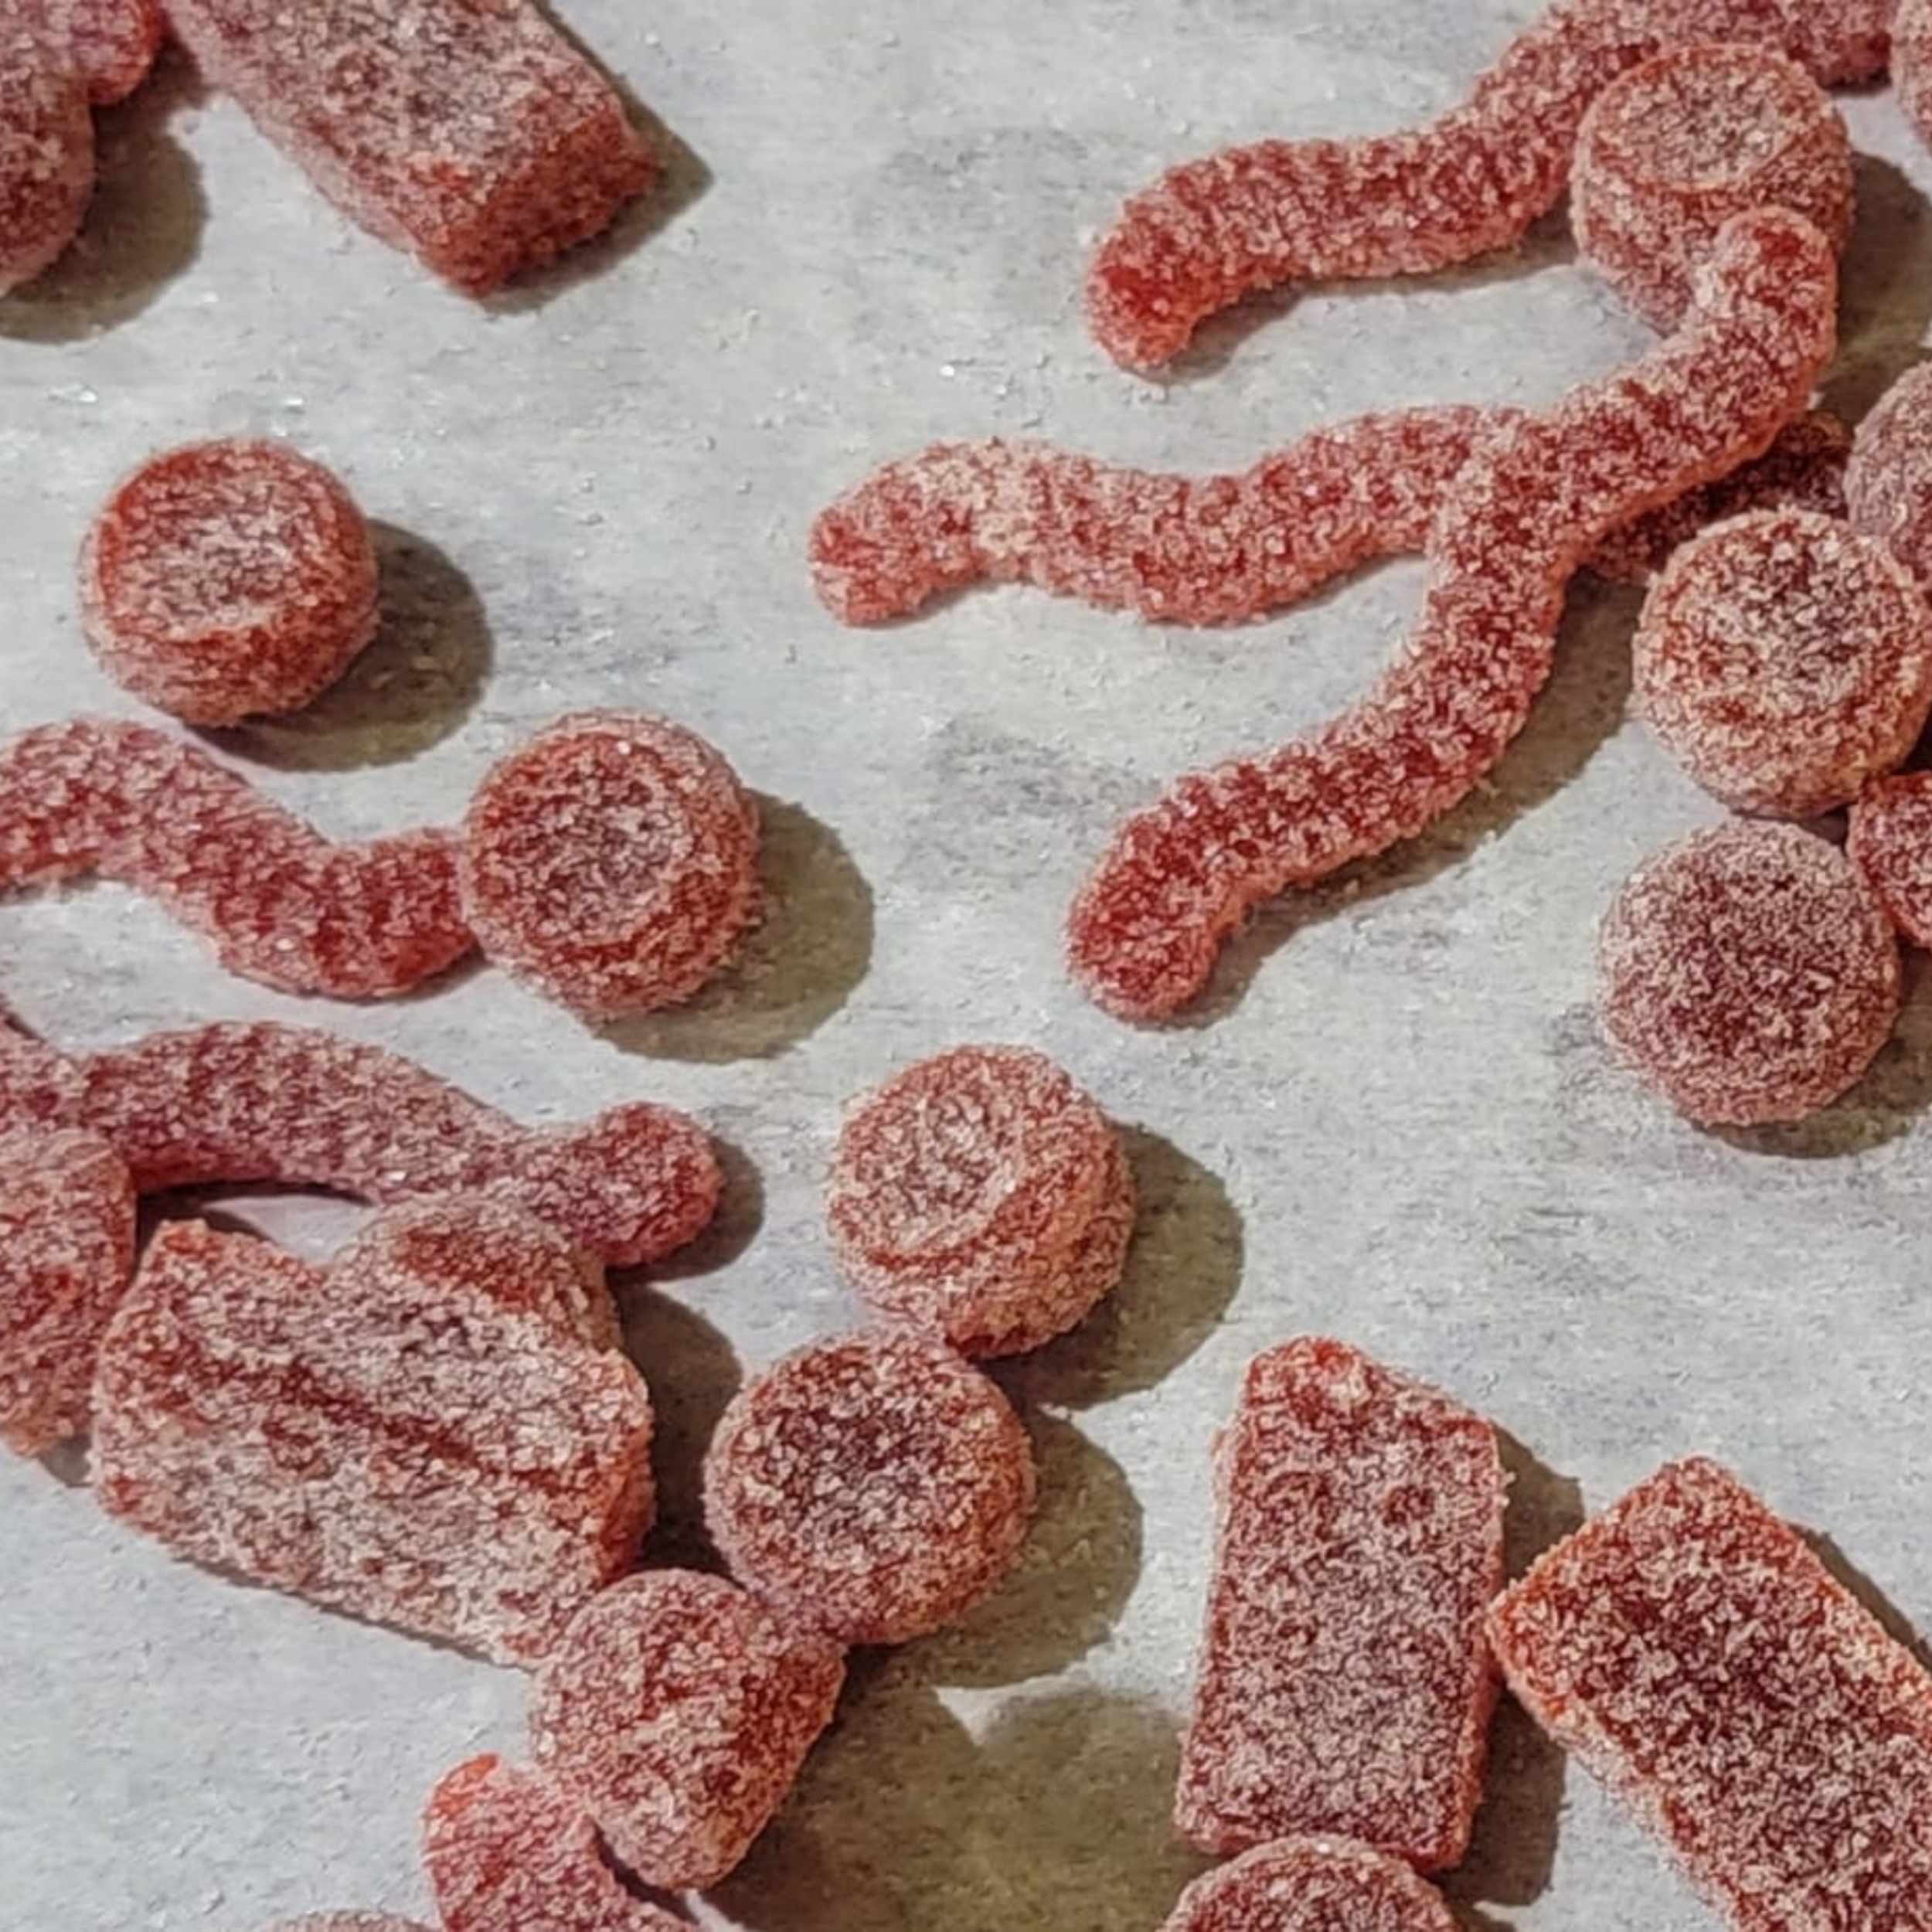 Keep your homemade gummies from sticking together with LEVO Sour Gummy Sugar! Unflavored Sour Gummy Sugar - Tangy powdered goodness to elevate any sweet treat.